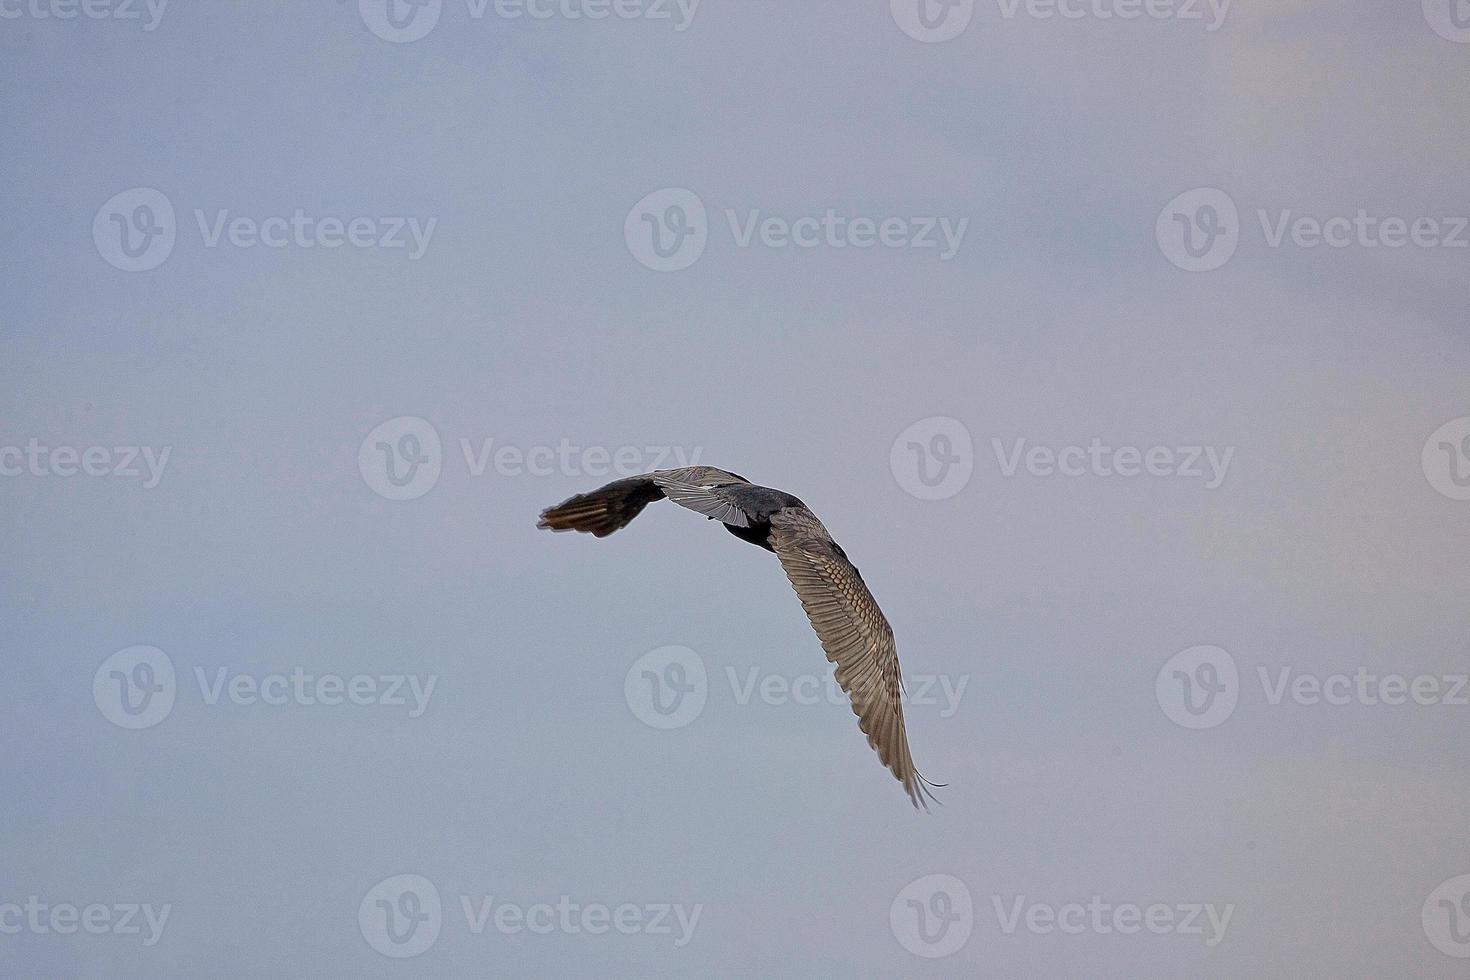 black cormorant bird in flight on a background of the blue cloudless sky photo